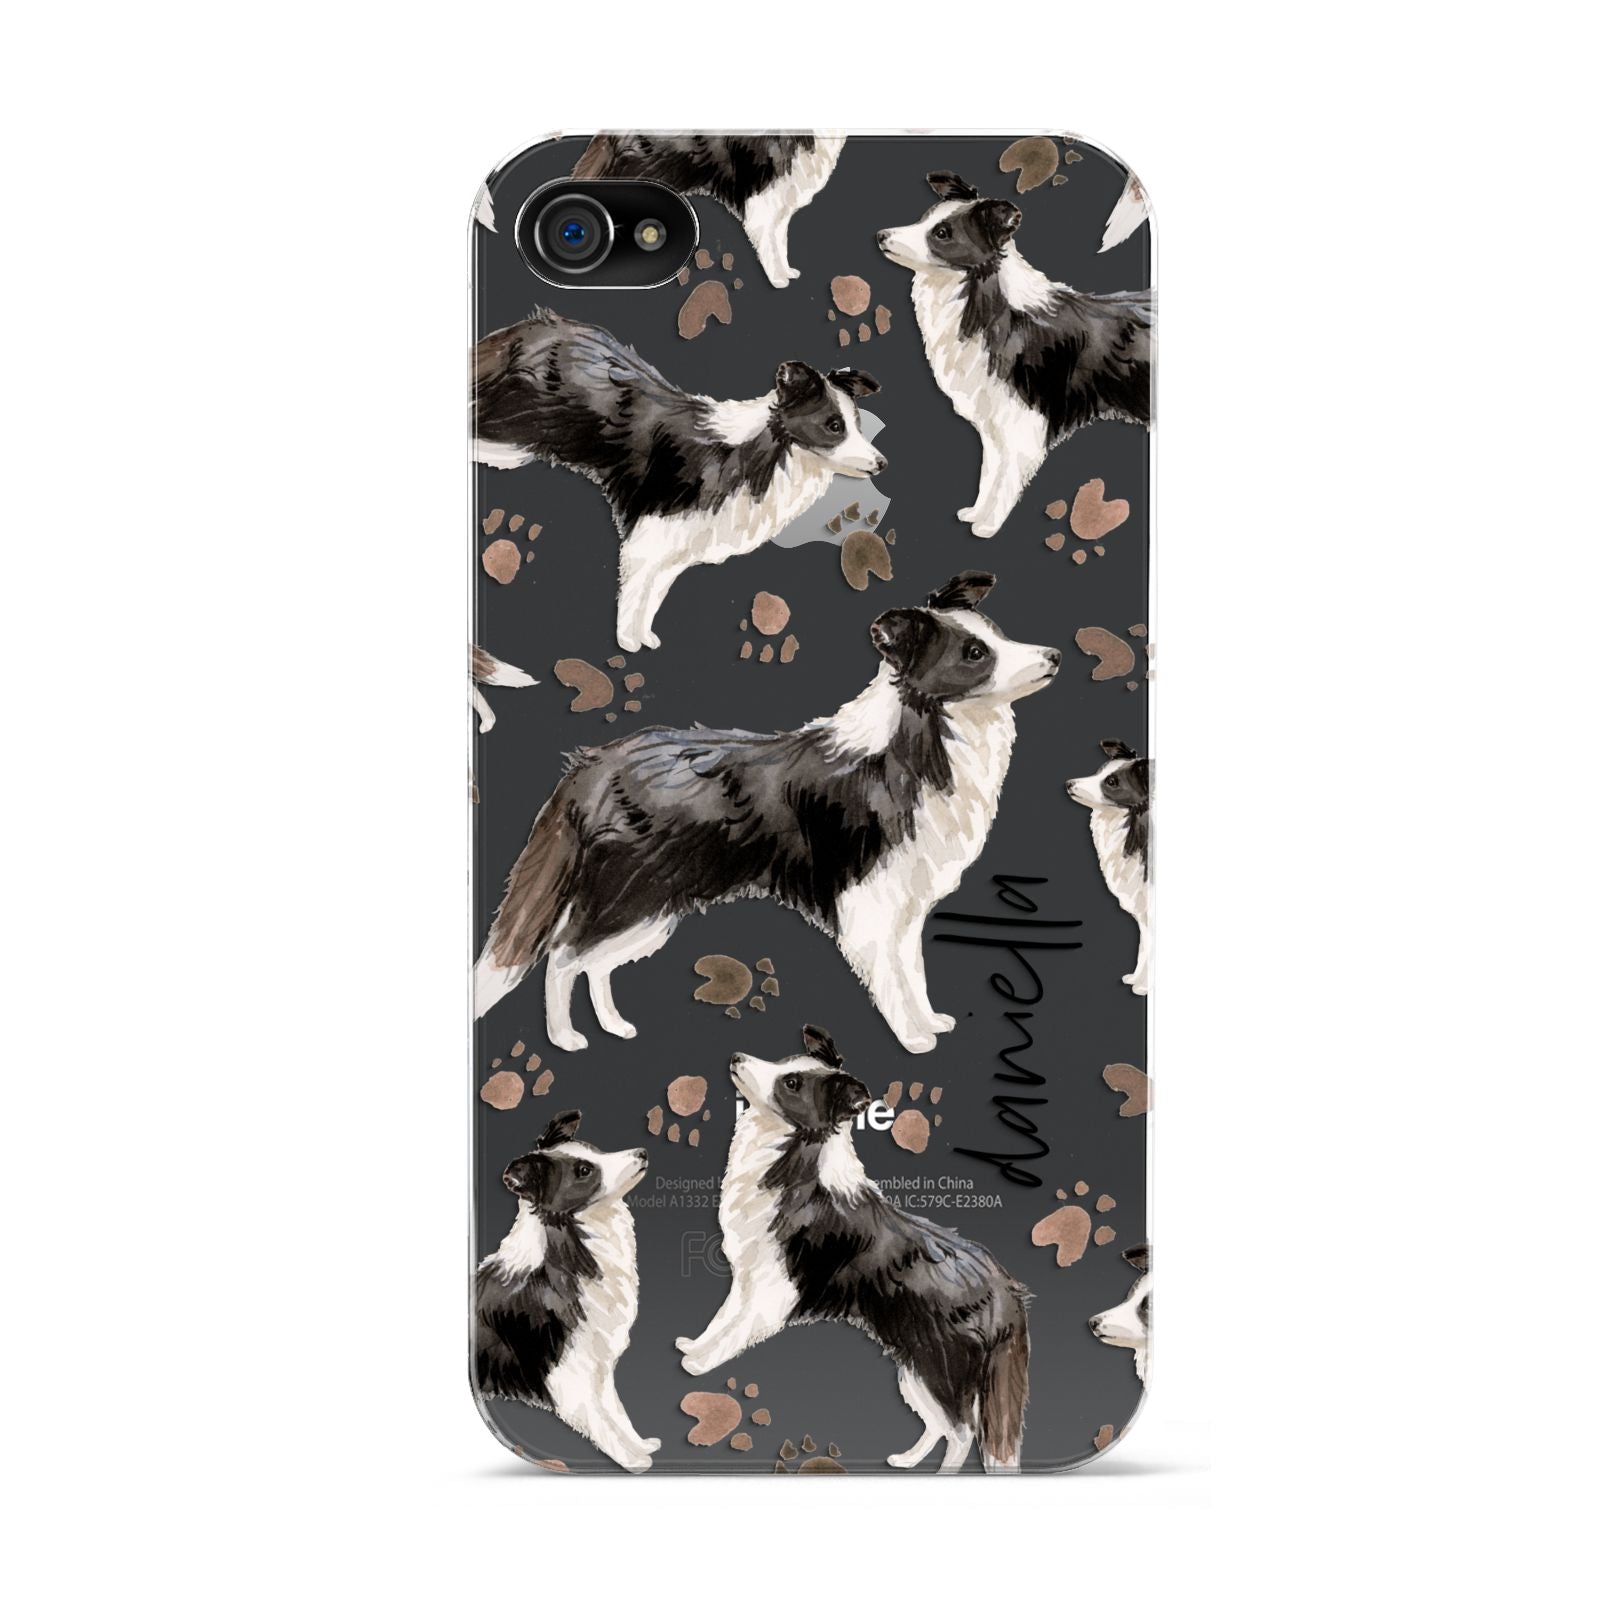 Personalised Border Collie Dog Apple iPhone 4s Case